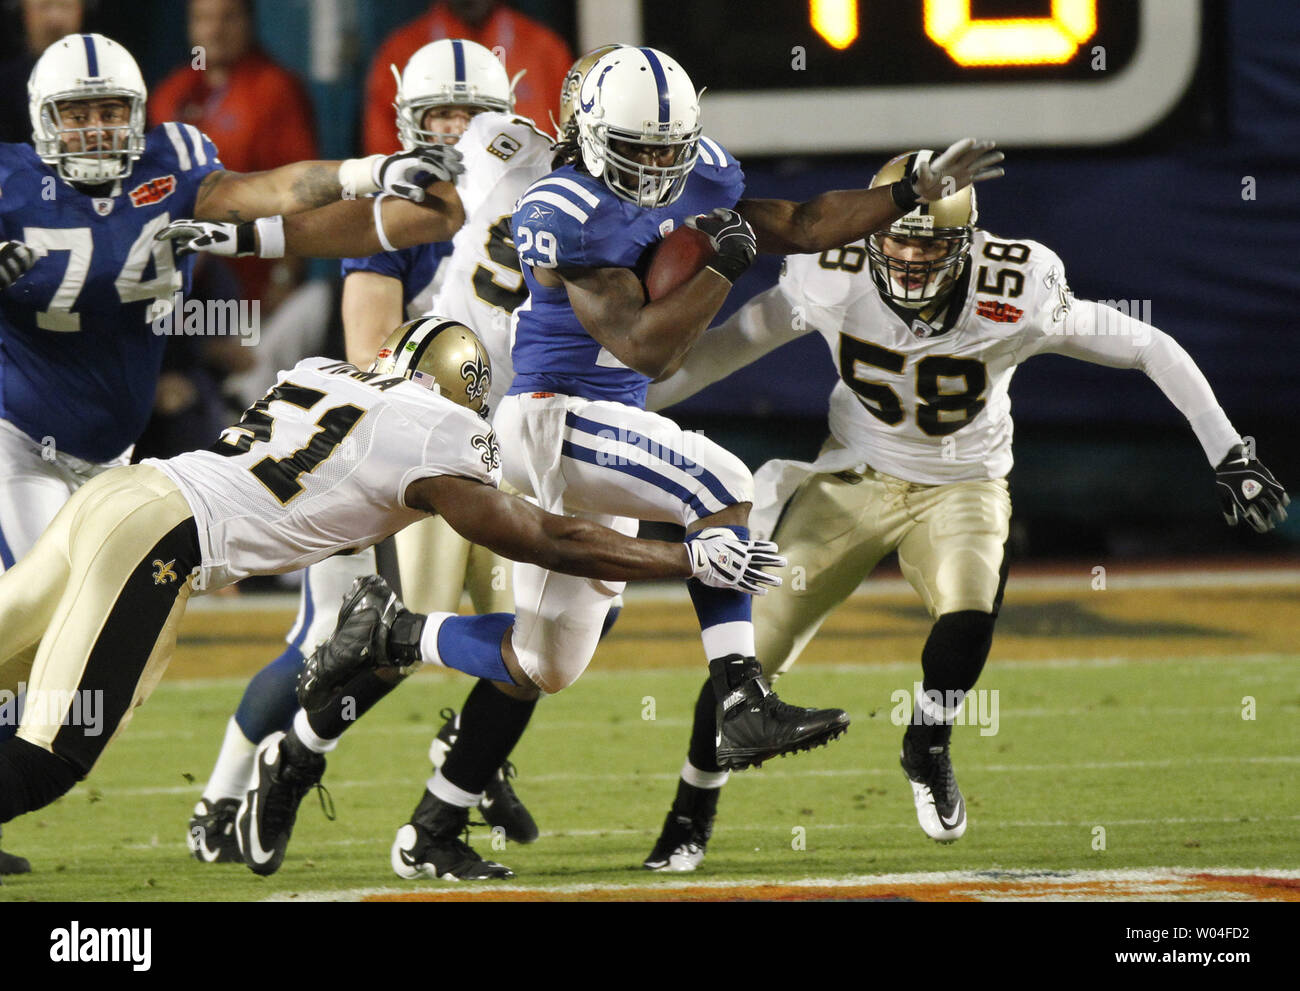 Indianapolis Colts running back Joseph Addai (C) runs against New Orleans  Saints linebackers Jonathan Vilma (51) and Anthony Waters (59)during the first  quarter at Super Bowl XLIV in Miami on February 7